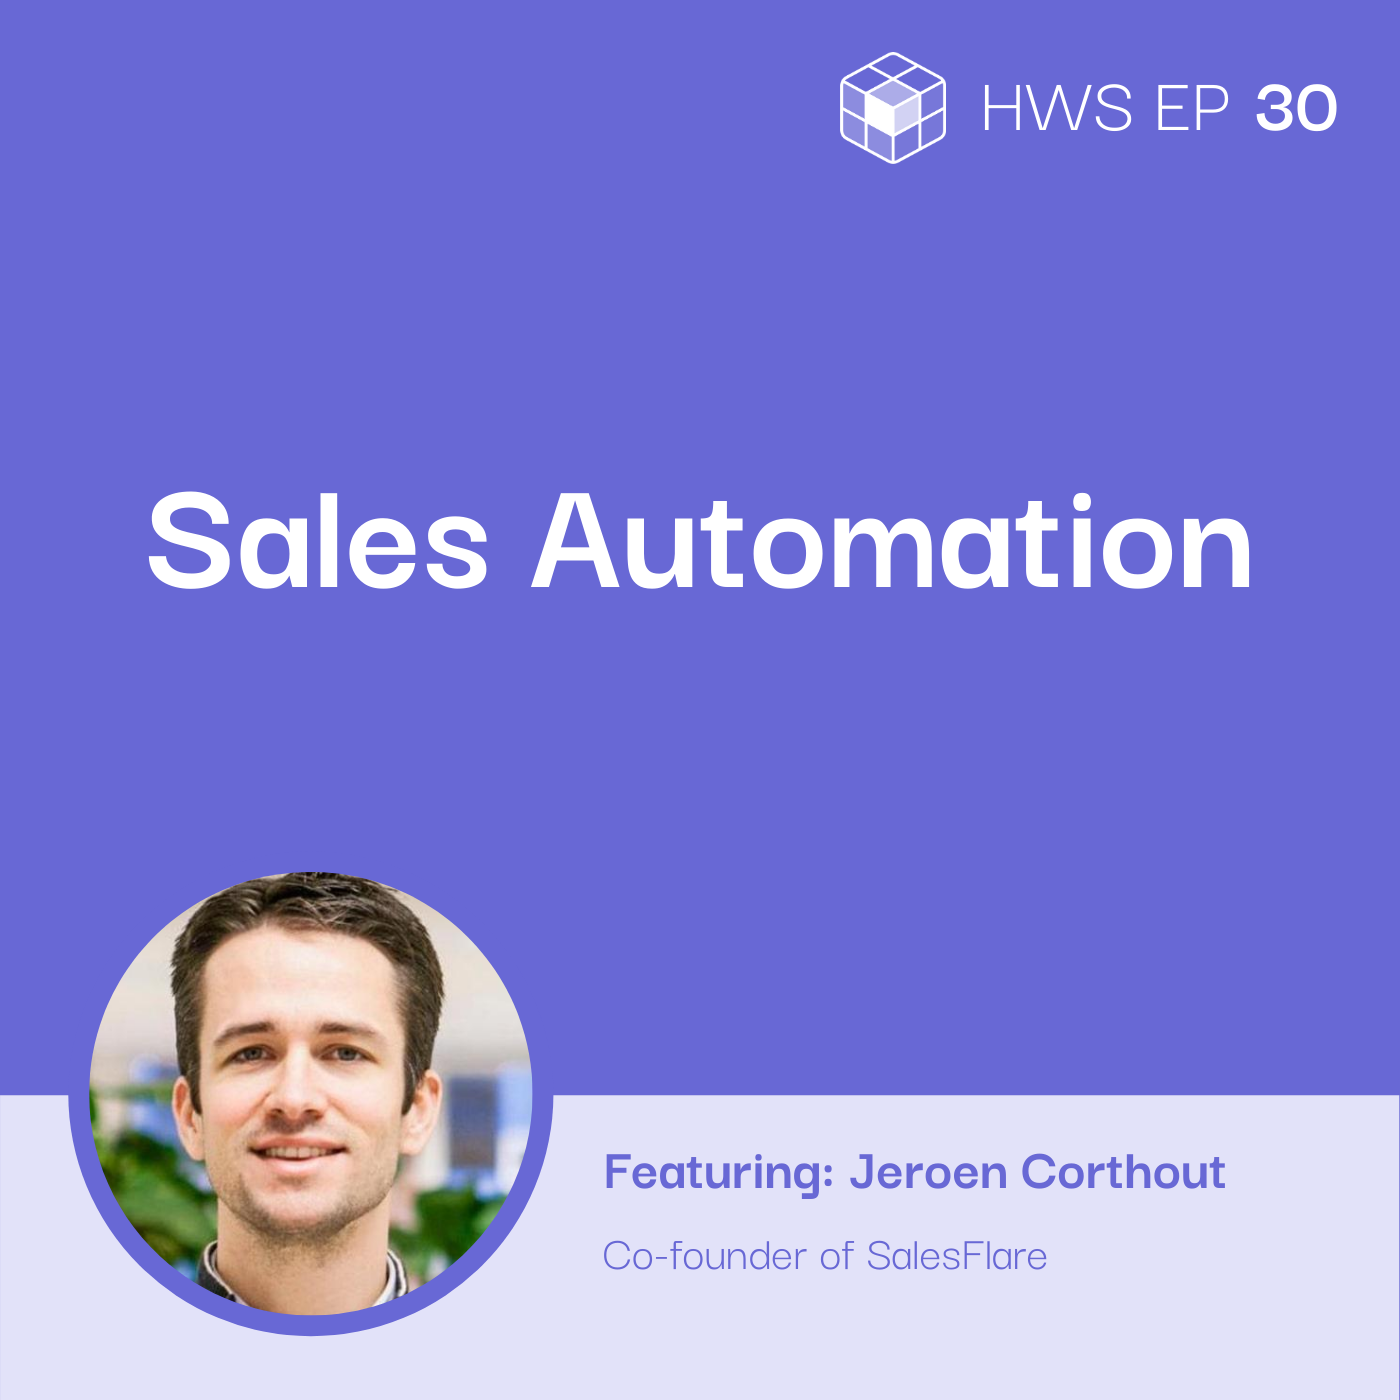 Jeroen Corthout from Salesflare talks about sales automation and how to free your time